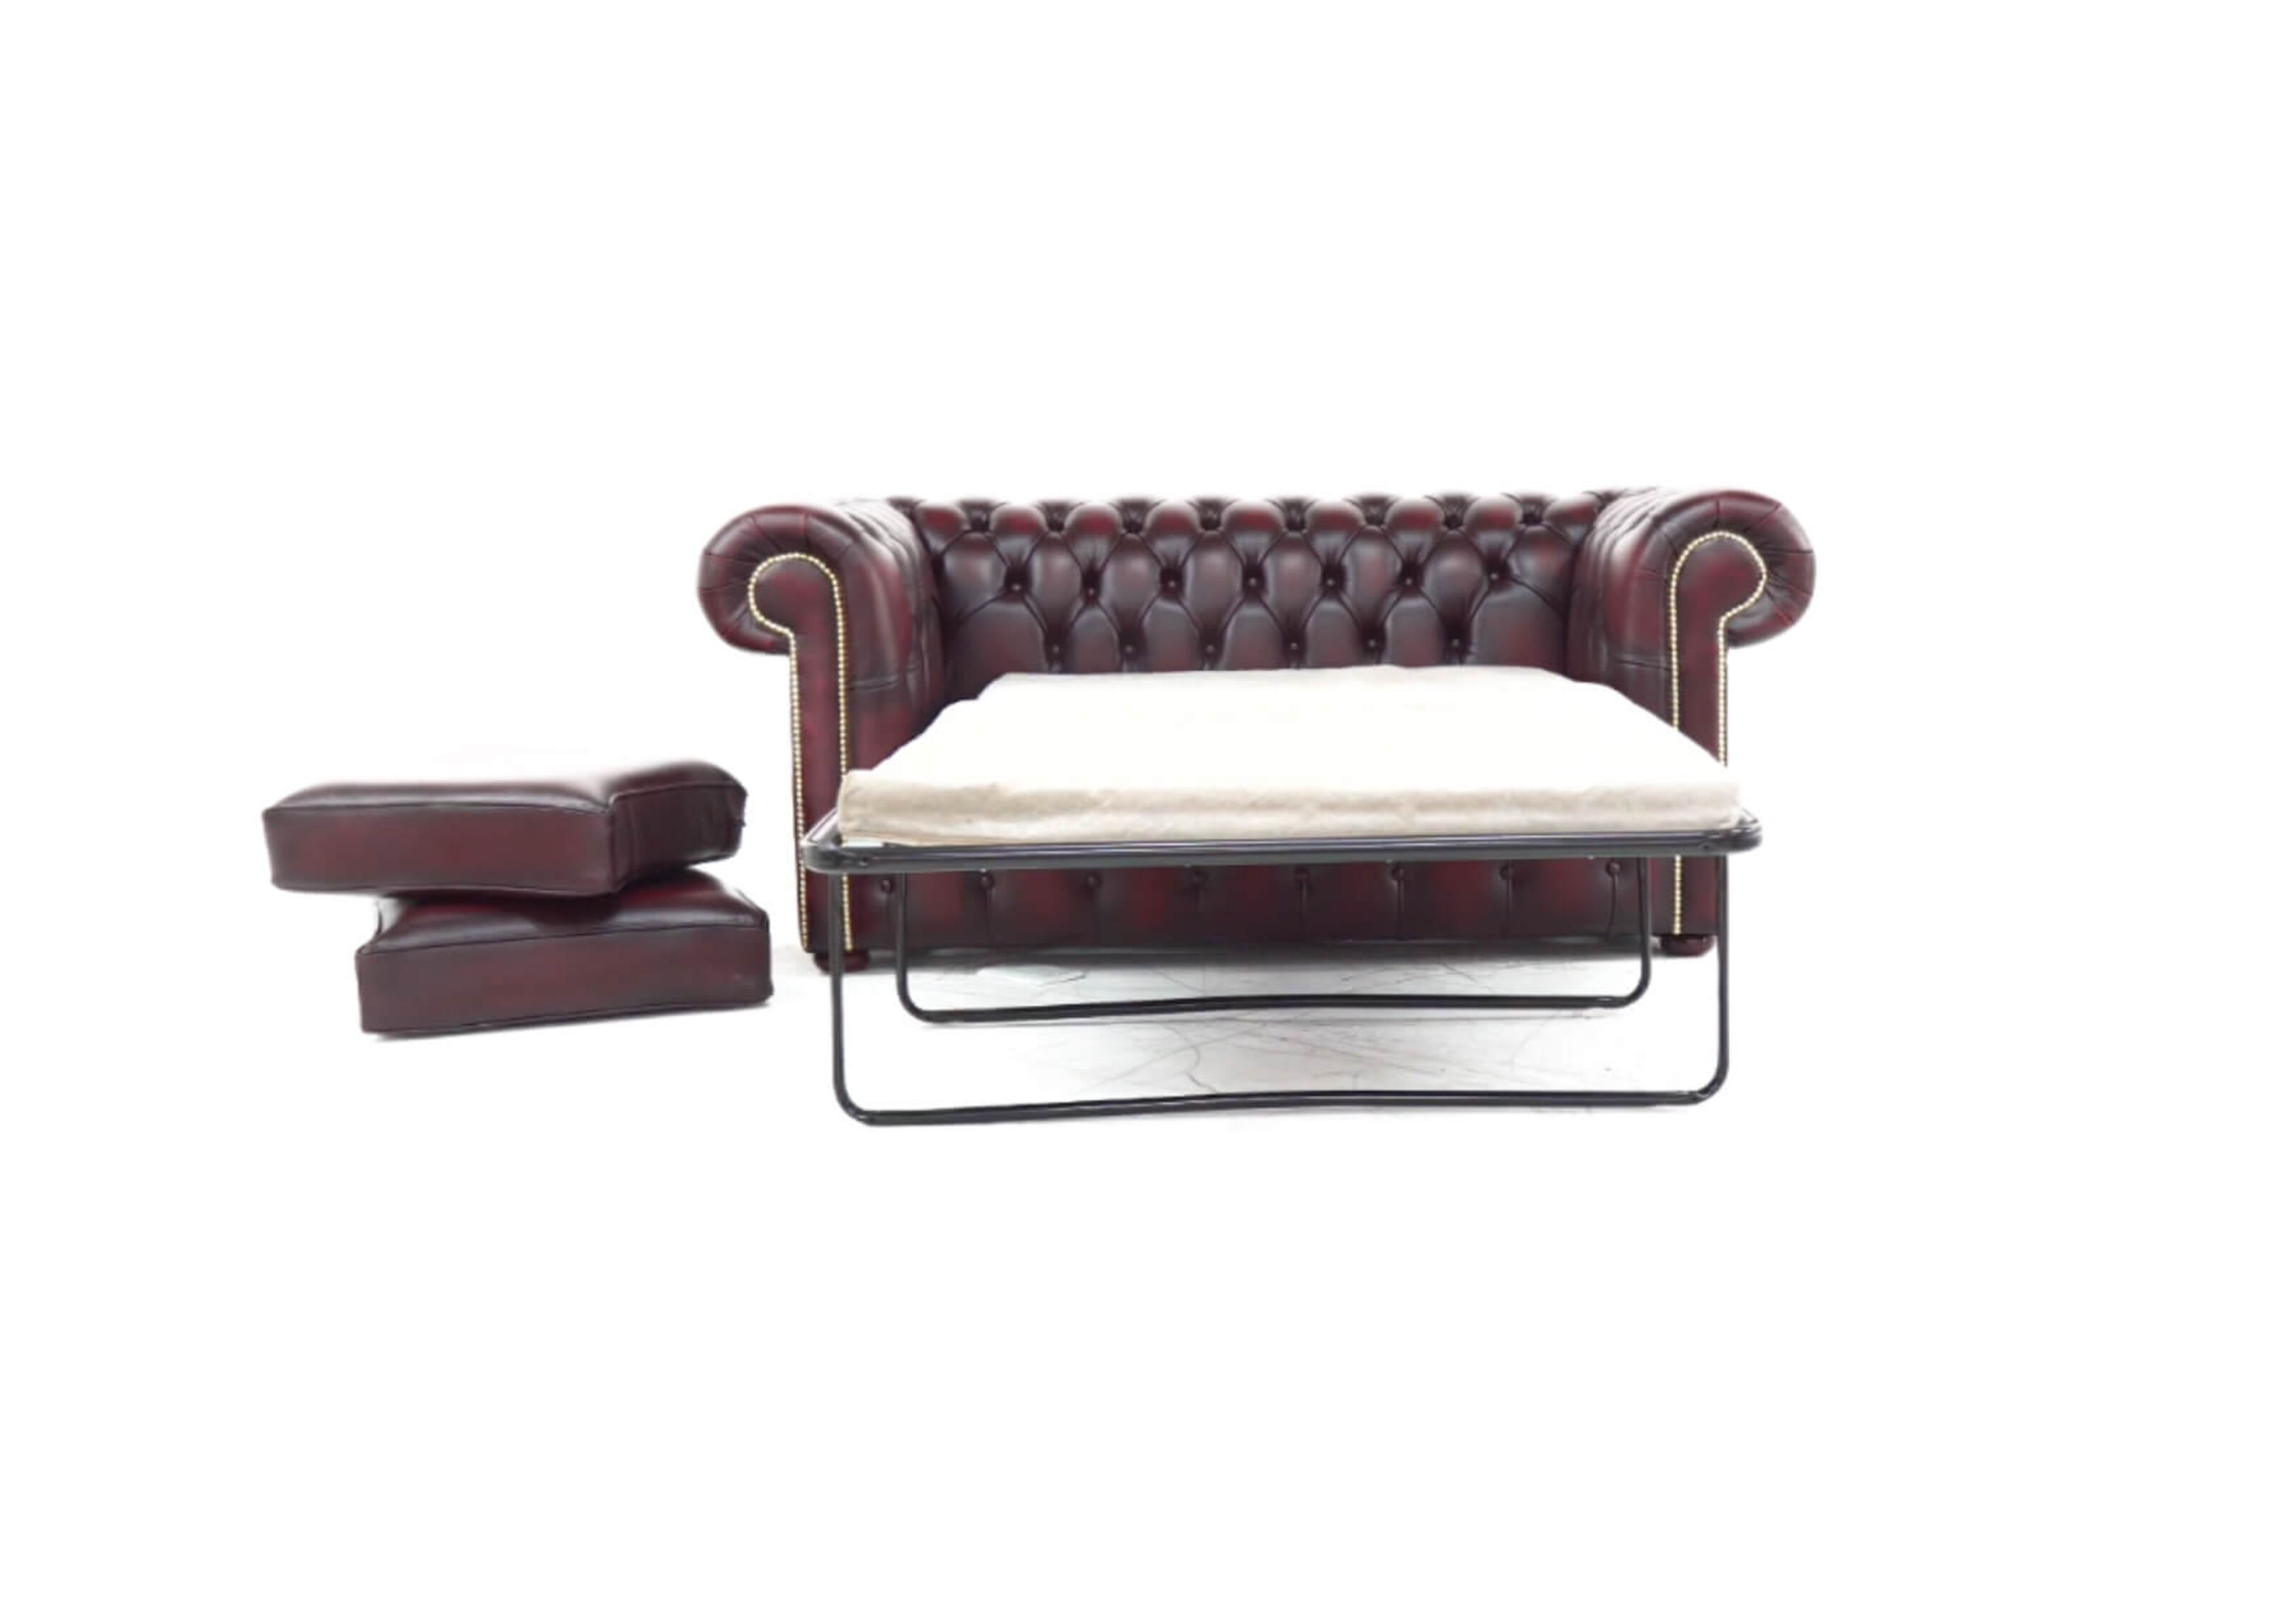 Elevate Your Home's Style with a Classy Chesterfield Leather Sofa  %Post Title